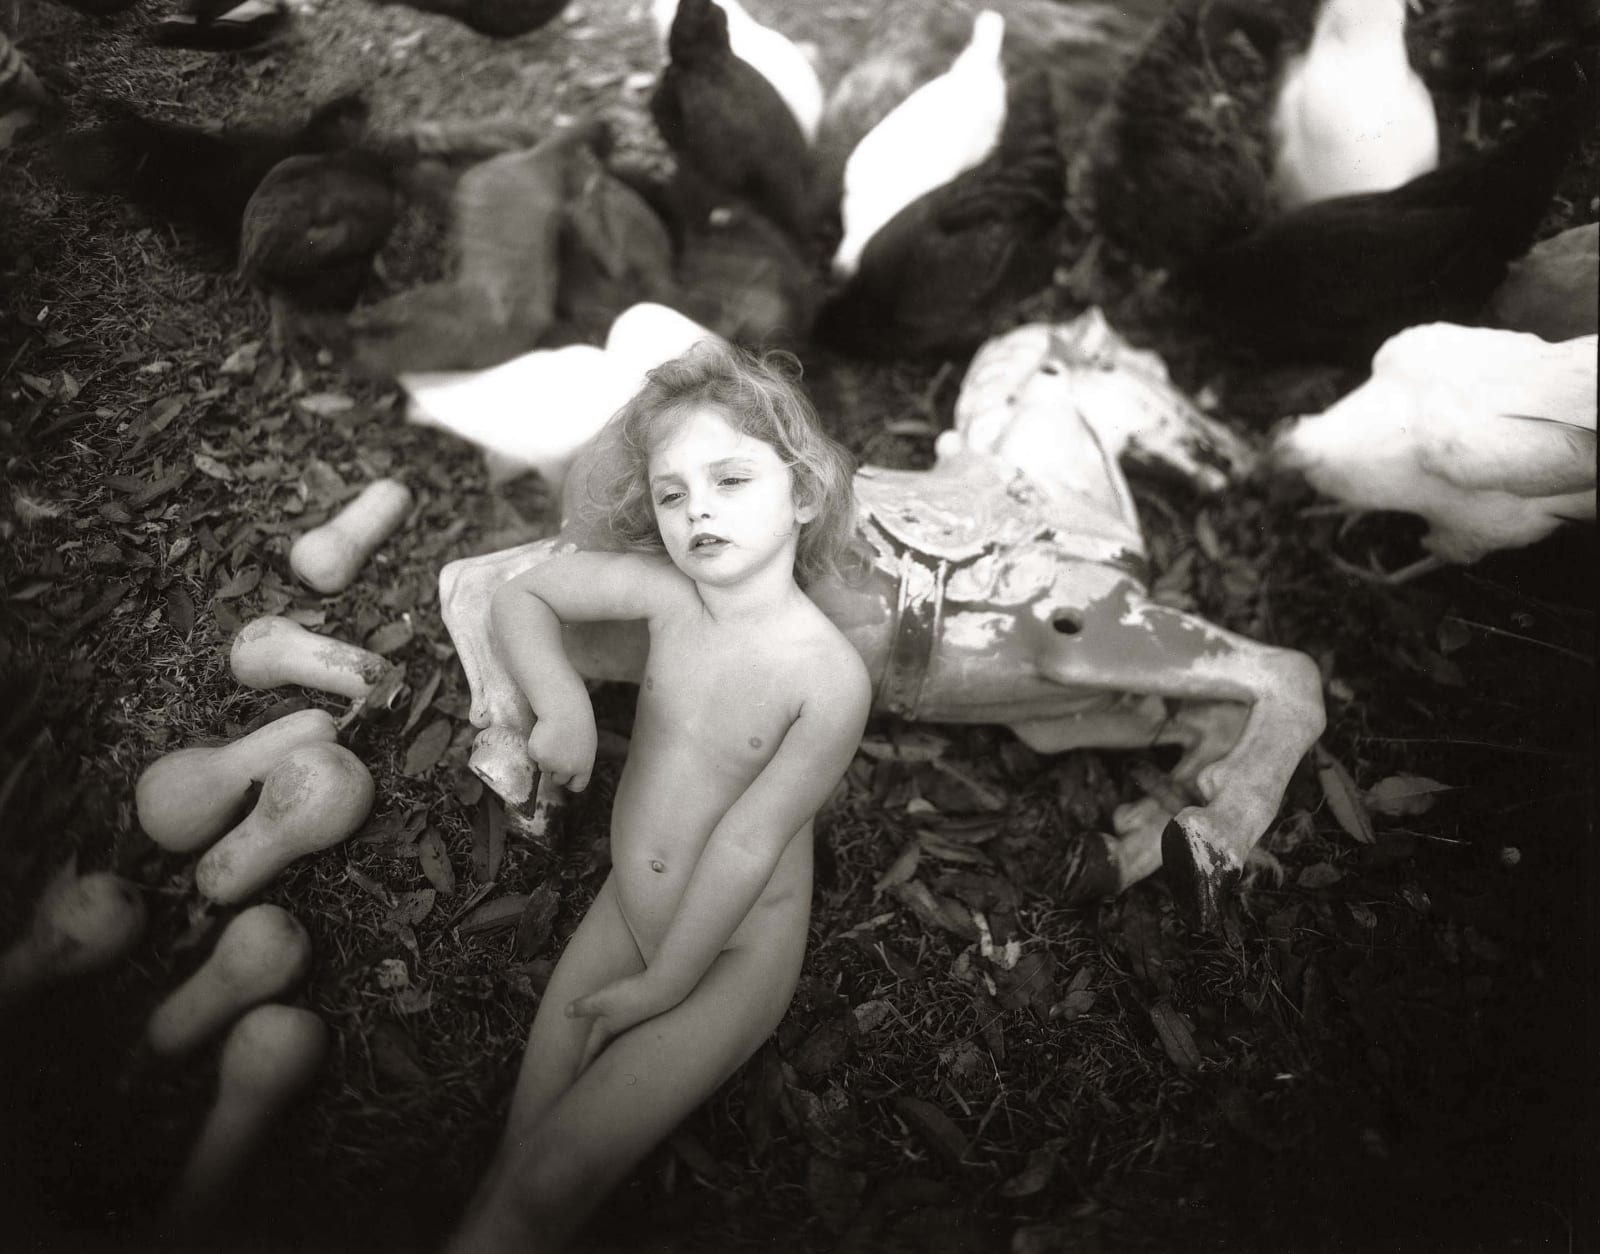 Virginia leaning against carousel pony with winter squash next to her, from the Immediate Family series by Sally Mann